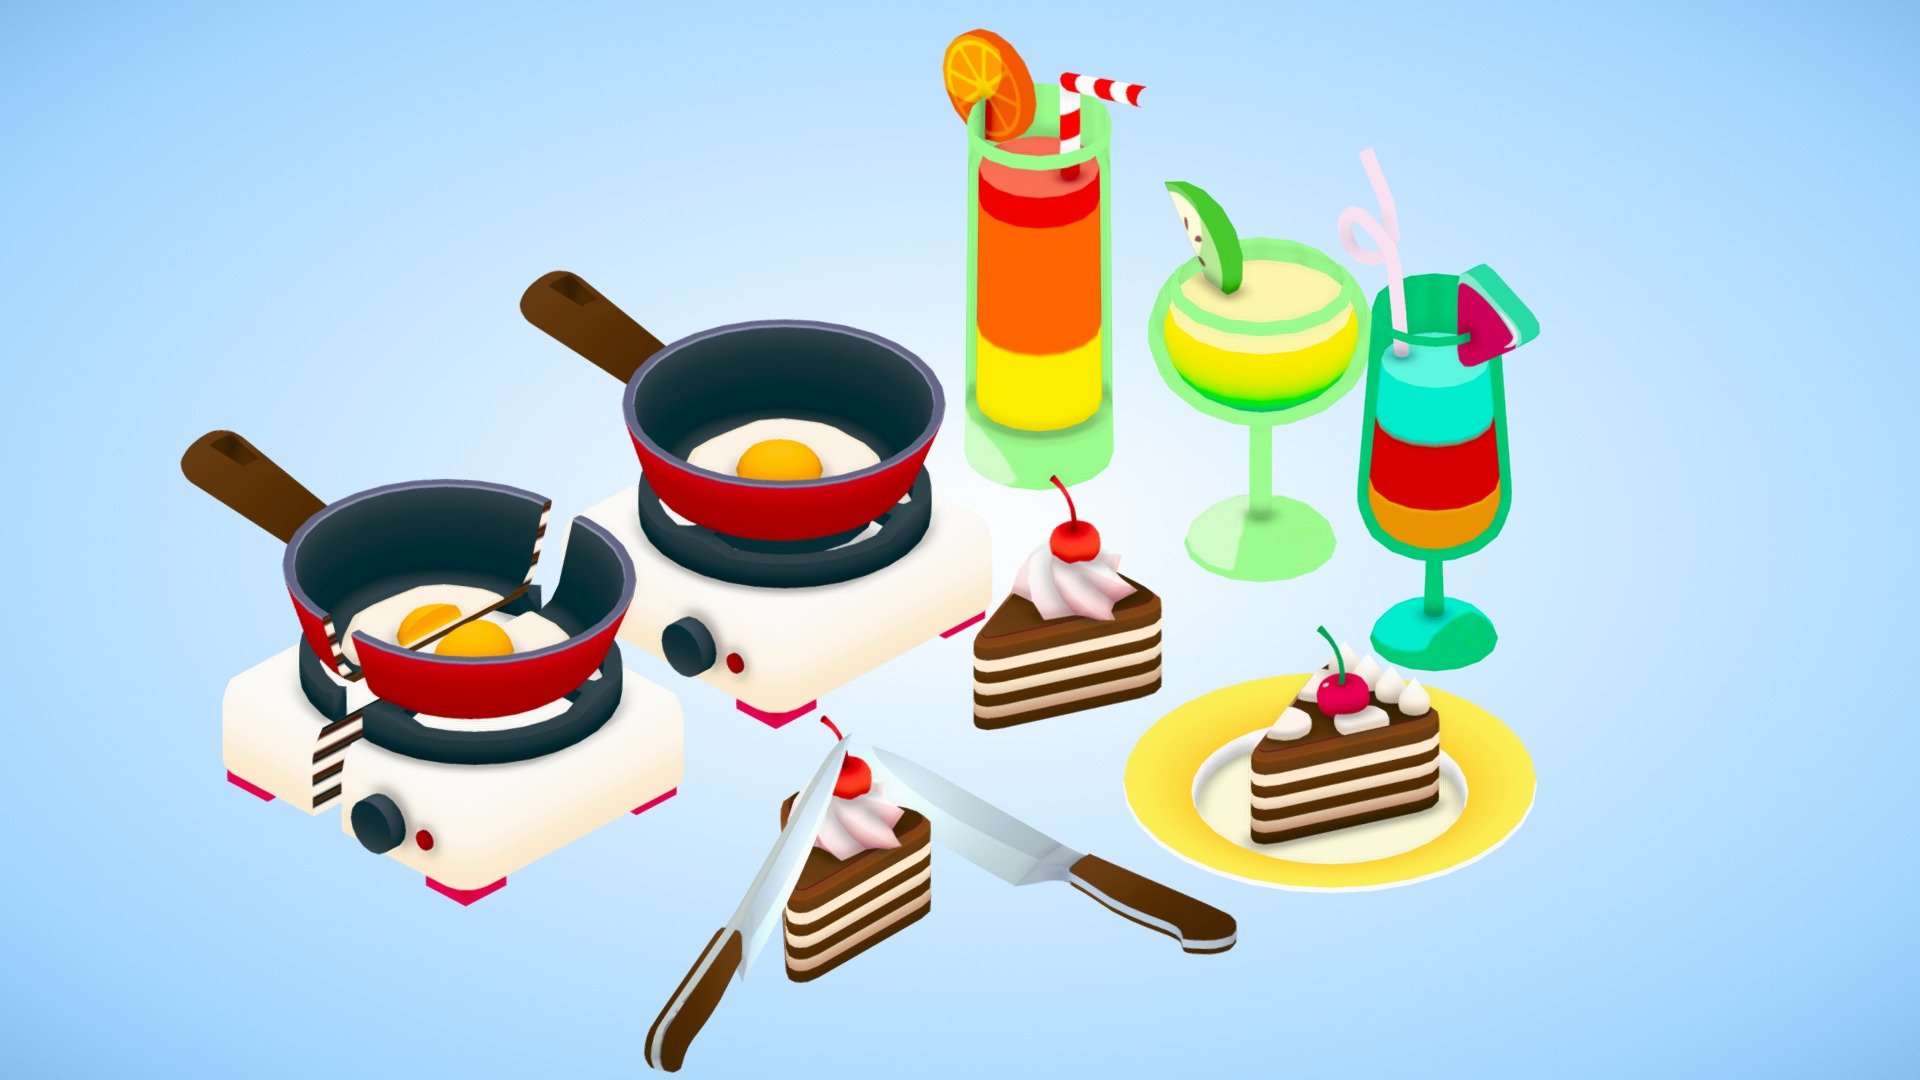 CAKE COKTAILS DRINKS DELICIOUS ASMR GAME CAKE CUTTING
Assets for ASMR GAMES . 
Done on blender . 
 Dont hesitate to contact me for game assets 3d model